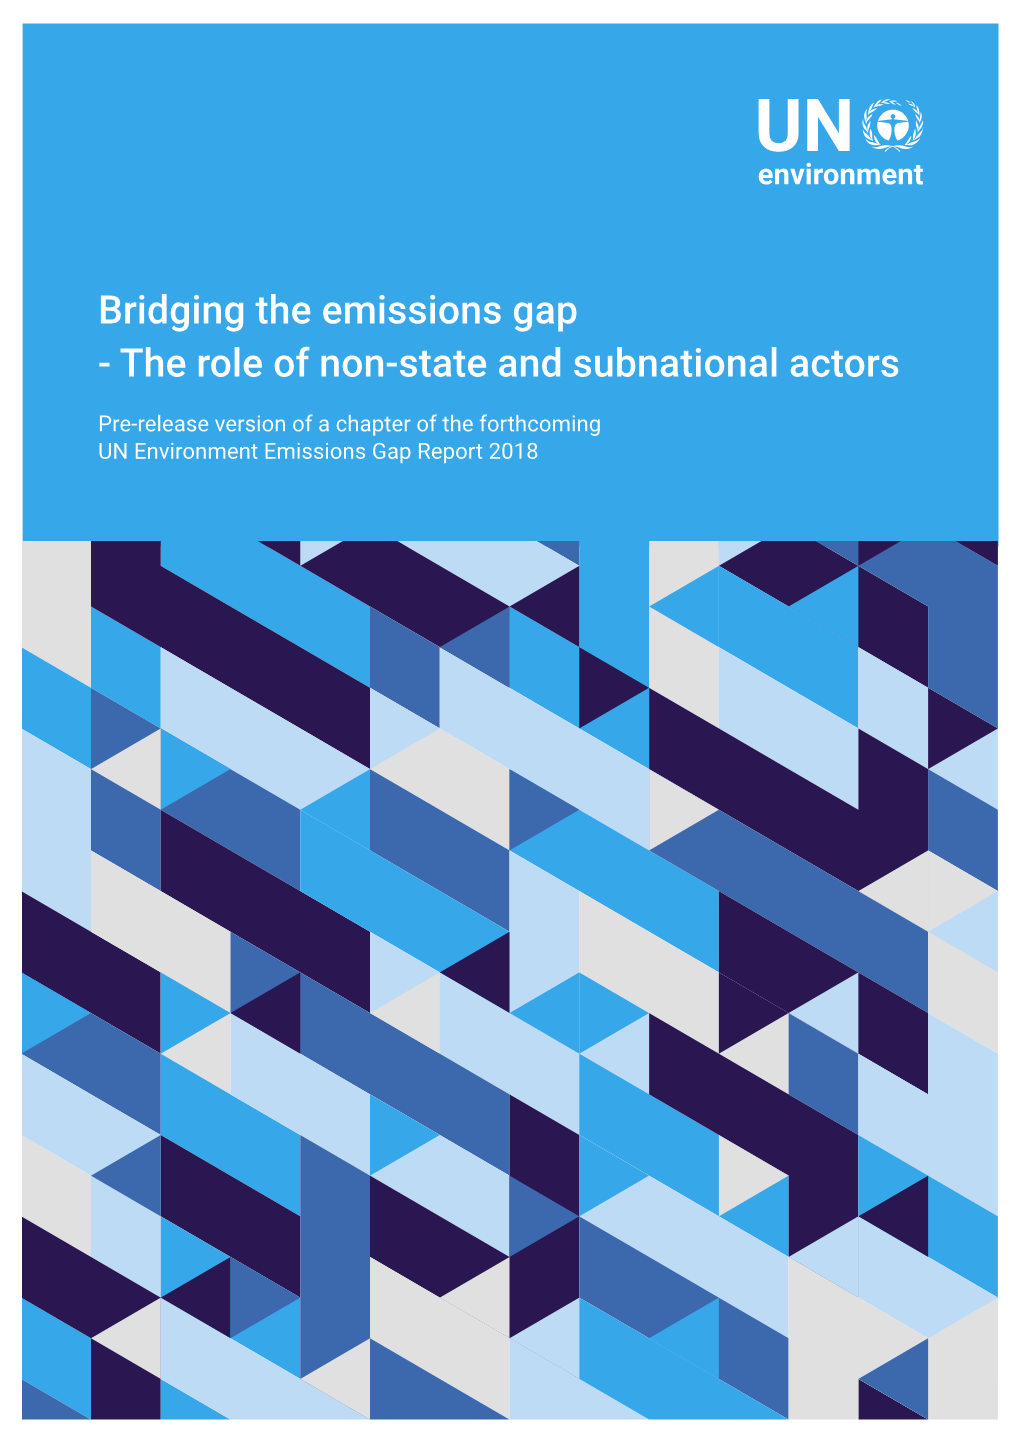 Bridging the Emissions Gap - the Role of Non-State and Subnational Actors